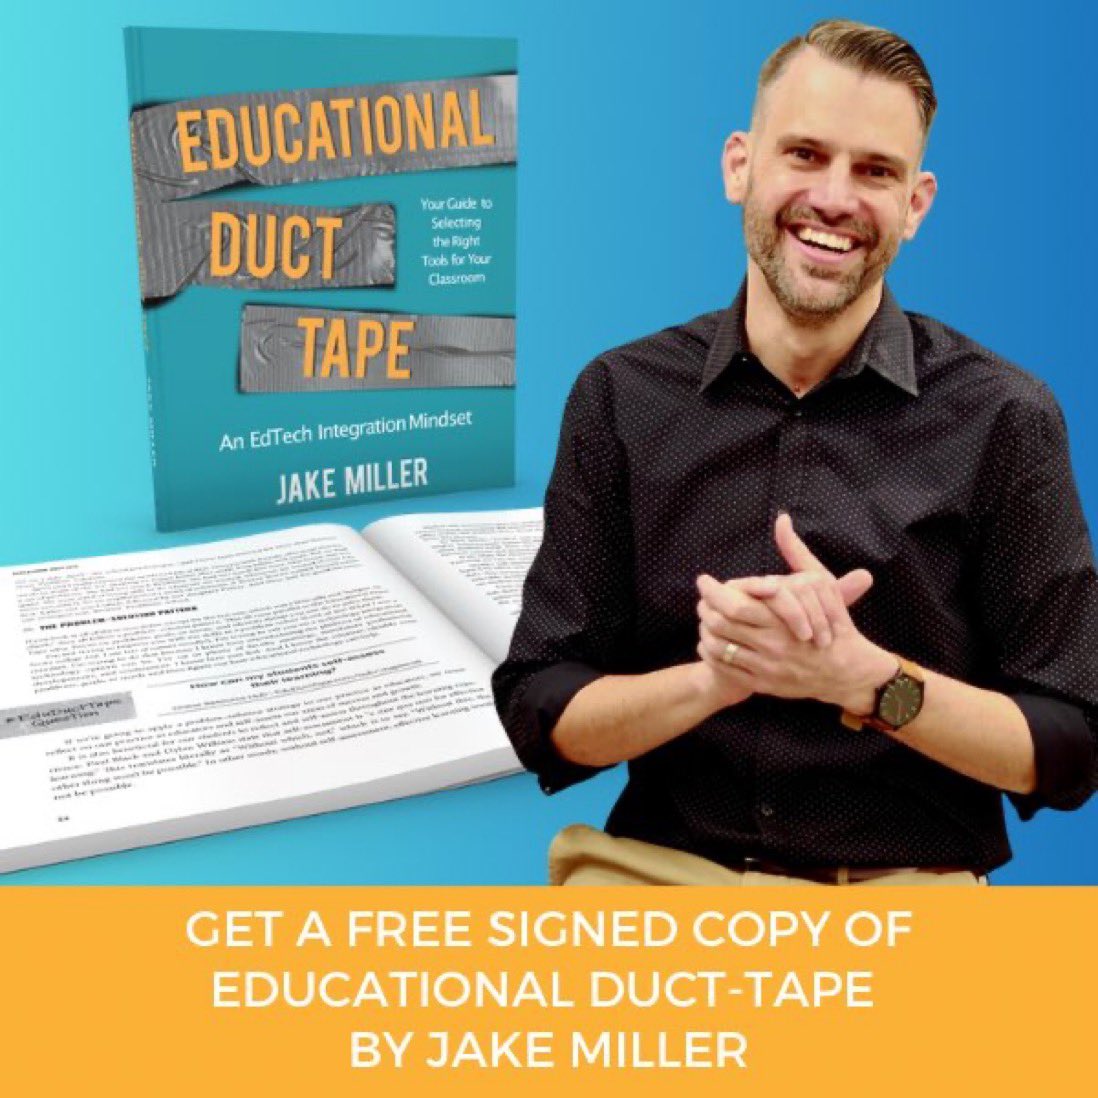 Getting new Chromebooks or iPads this summer?

Need a tool to manage them?

Like free stuff?

Check out VIZOR and get a FREE signed copy of Educational Duct Tape!

👉 Click here vizor.cloud/jake 

@JakeMillerTech #EduDuctTape #EdTech